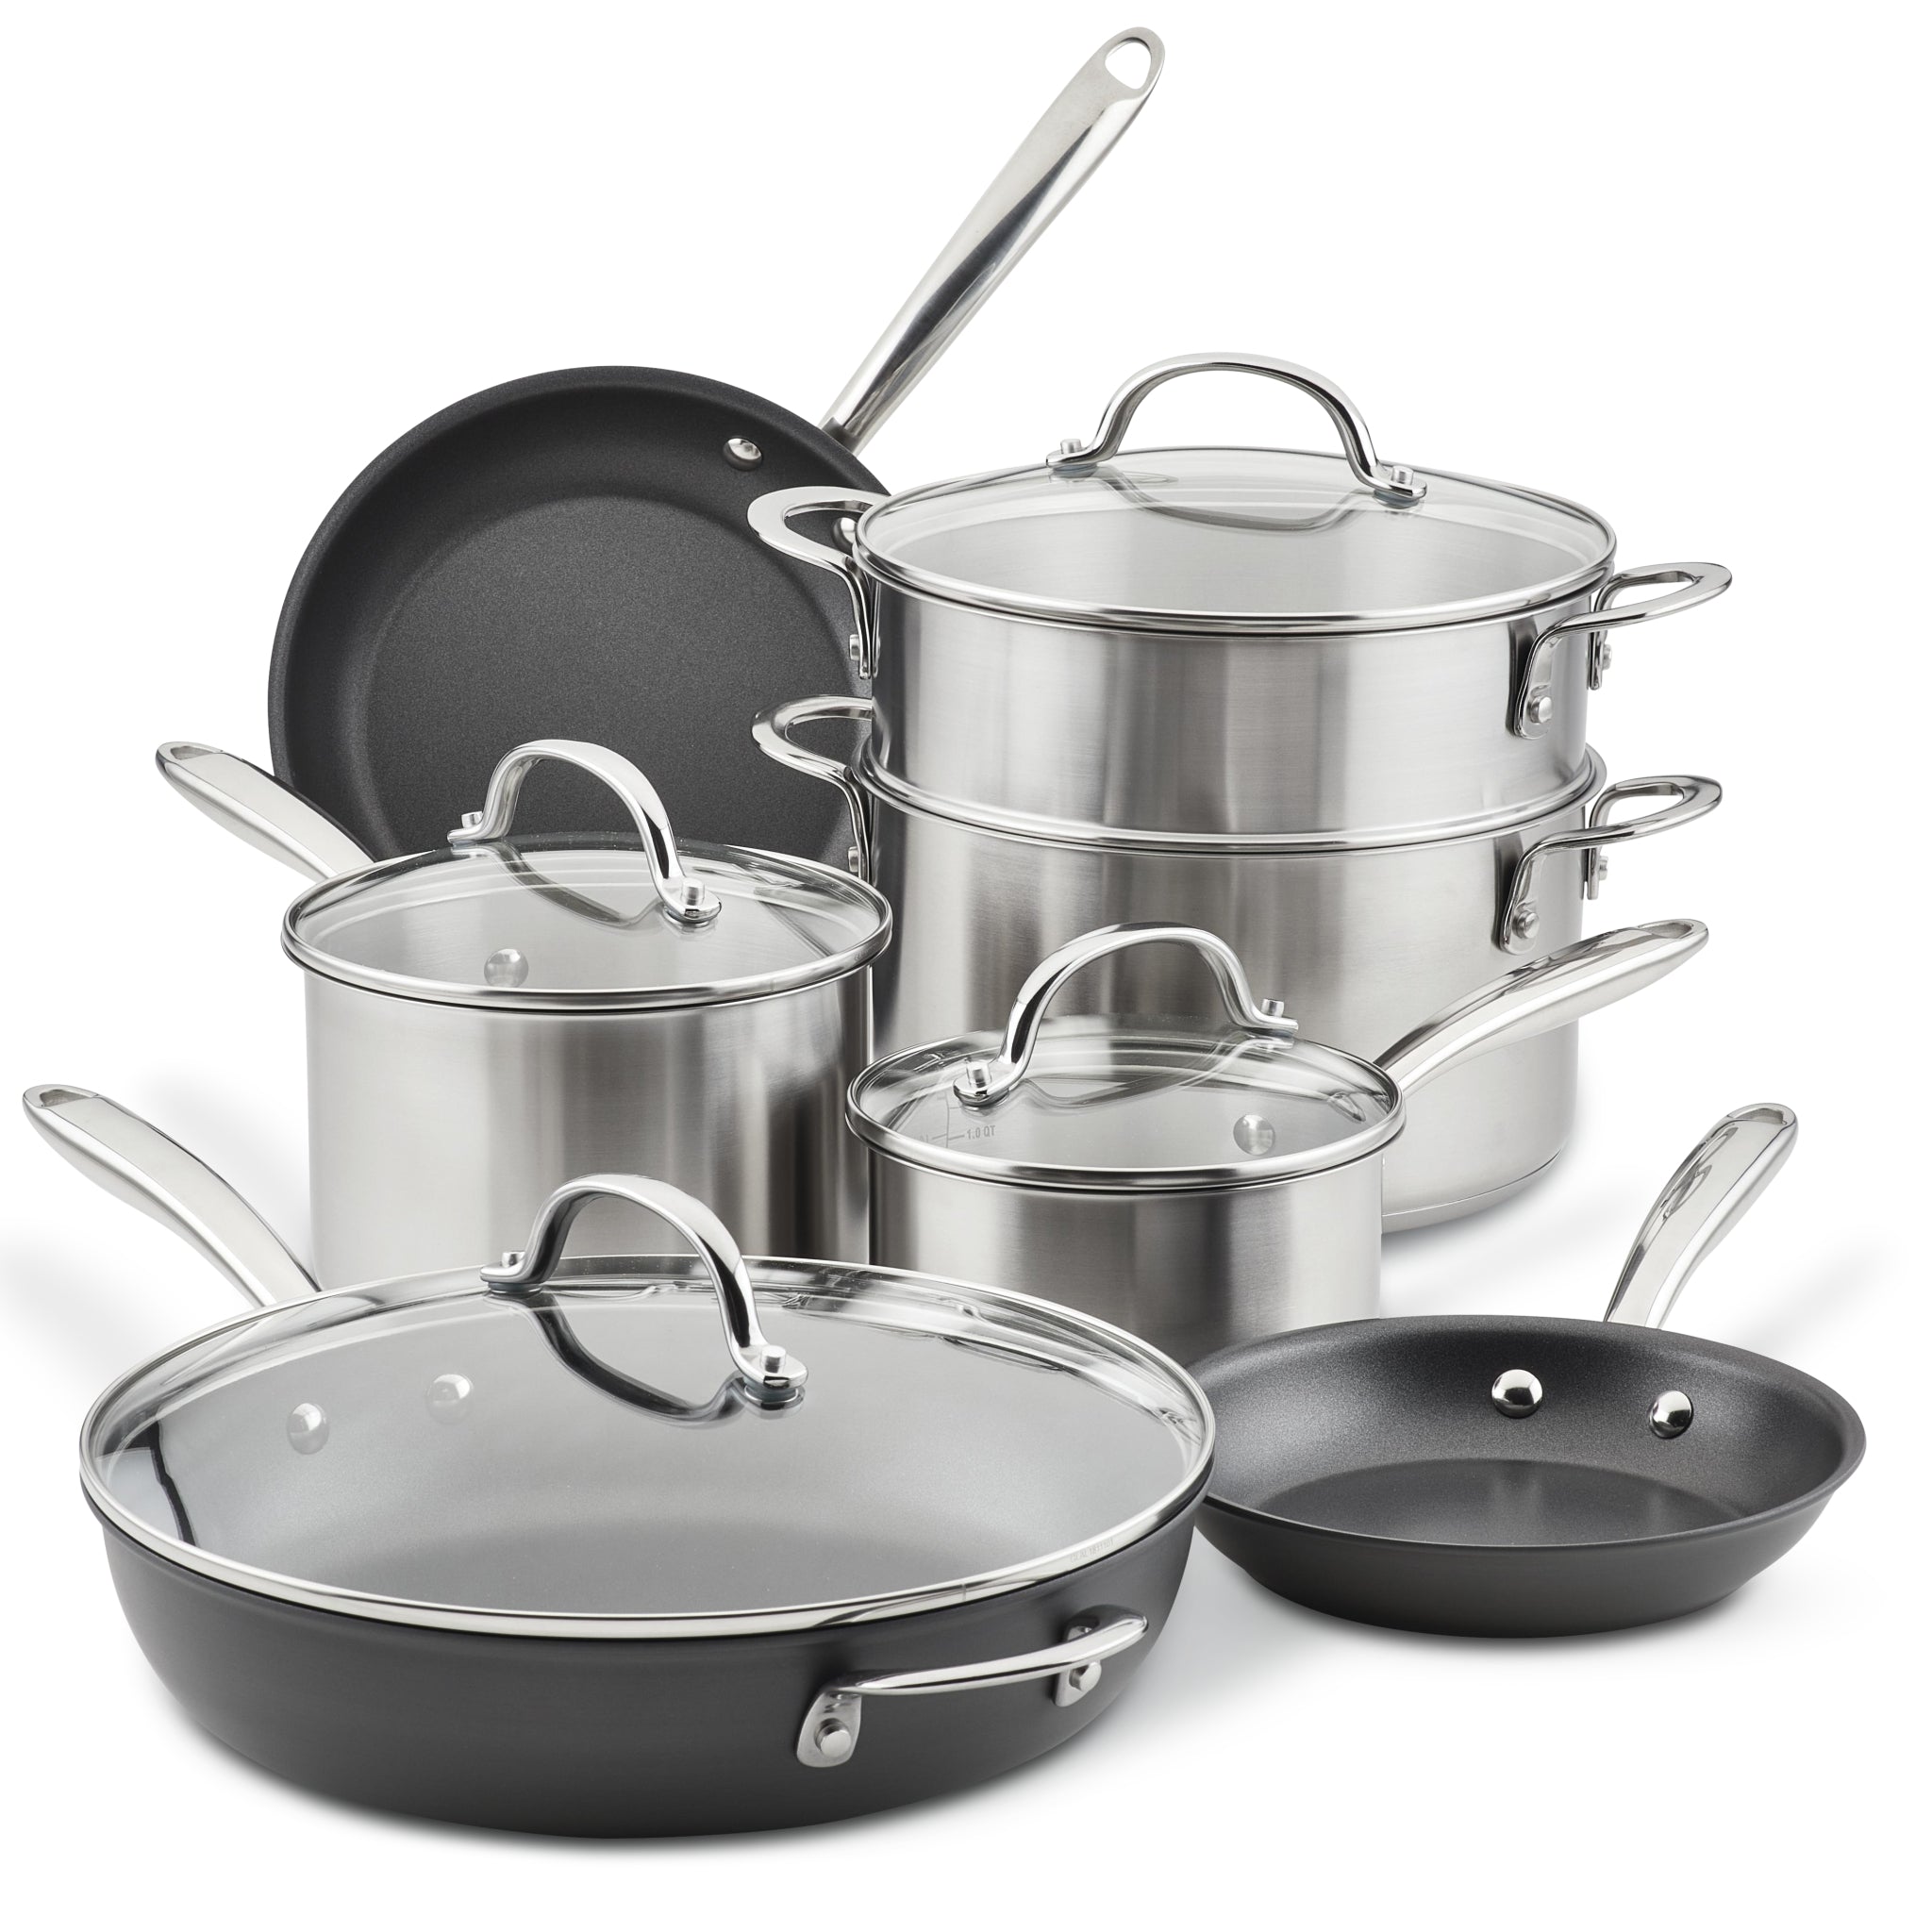  ROYDX 10-Piece Pots and Pans Set, Stainless Steel Pan